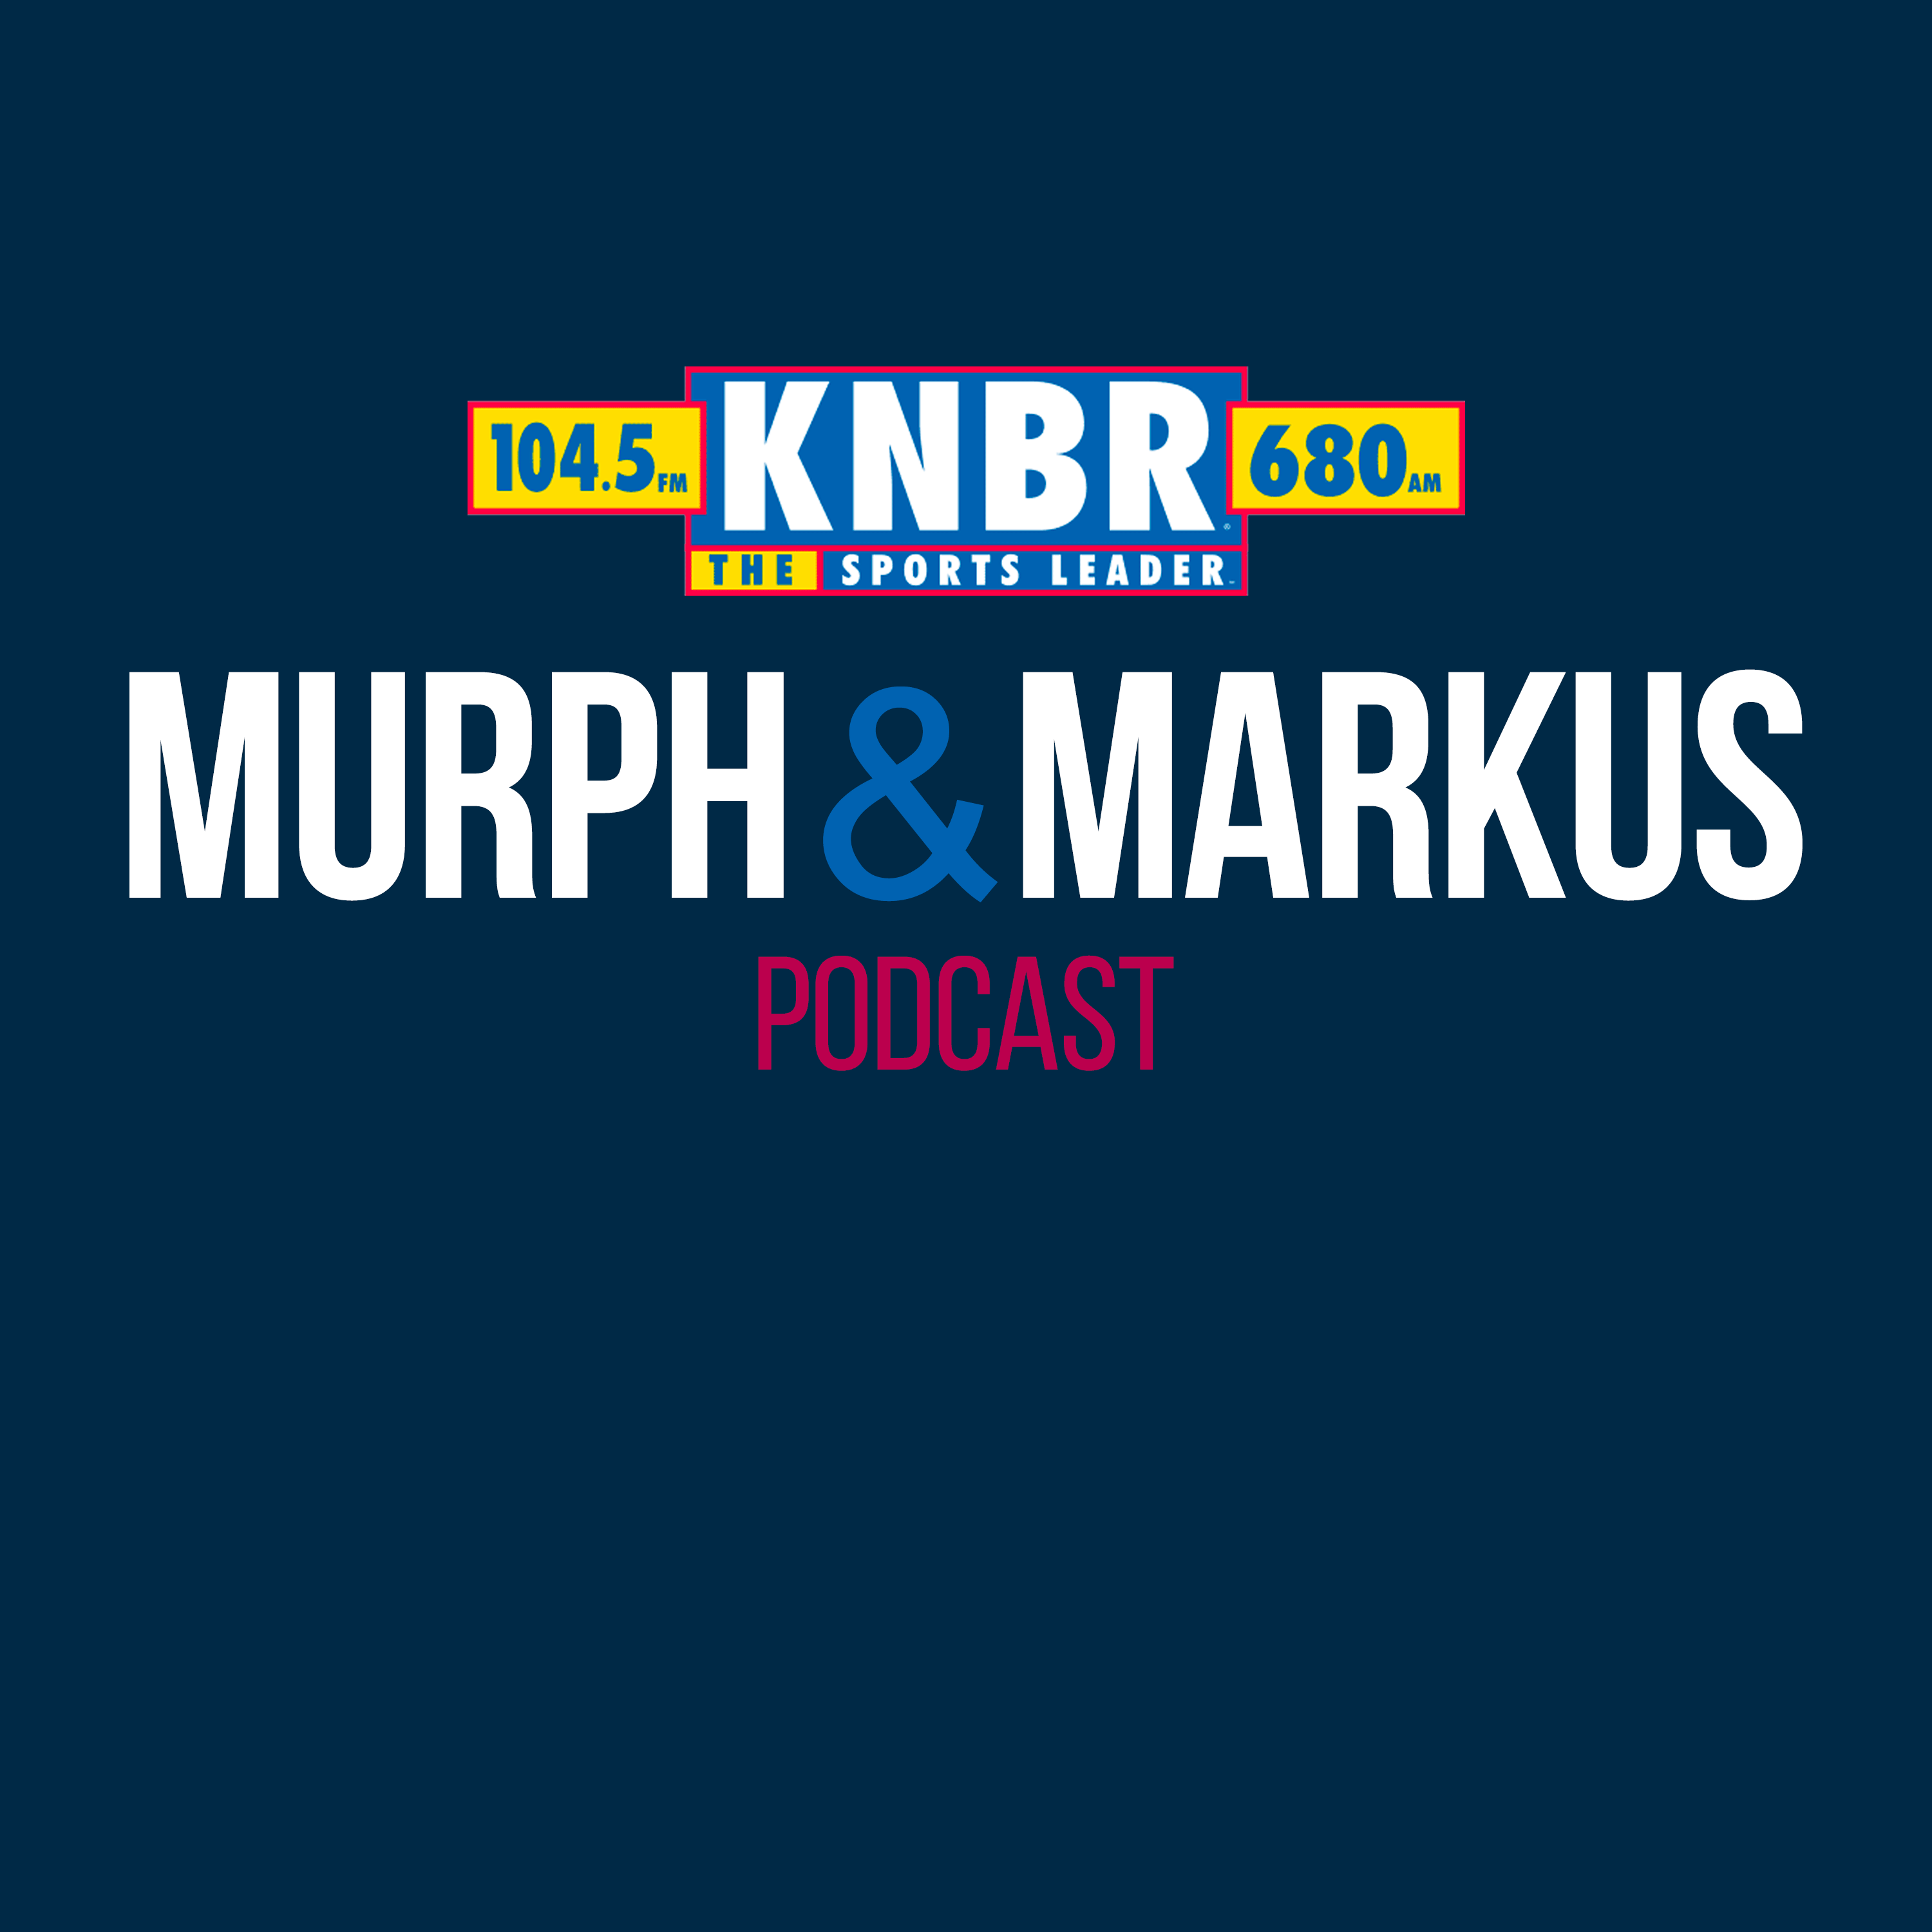 4-23 Hour 2: Murph & Markus react to some of the biggest highlights from the NBA playoff games last night, talk to Duane Kuiper, and get into today's top story in the Big Hit